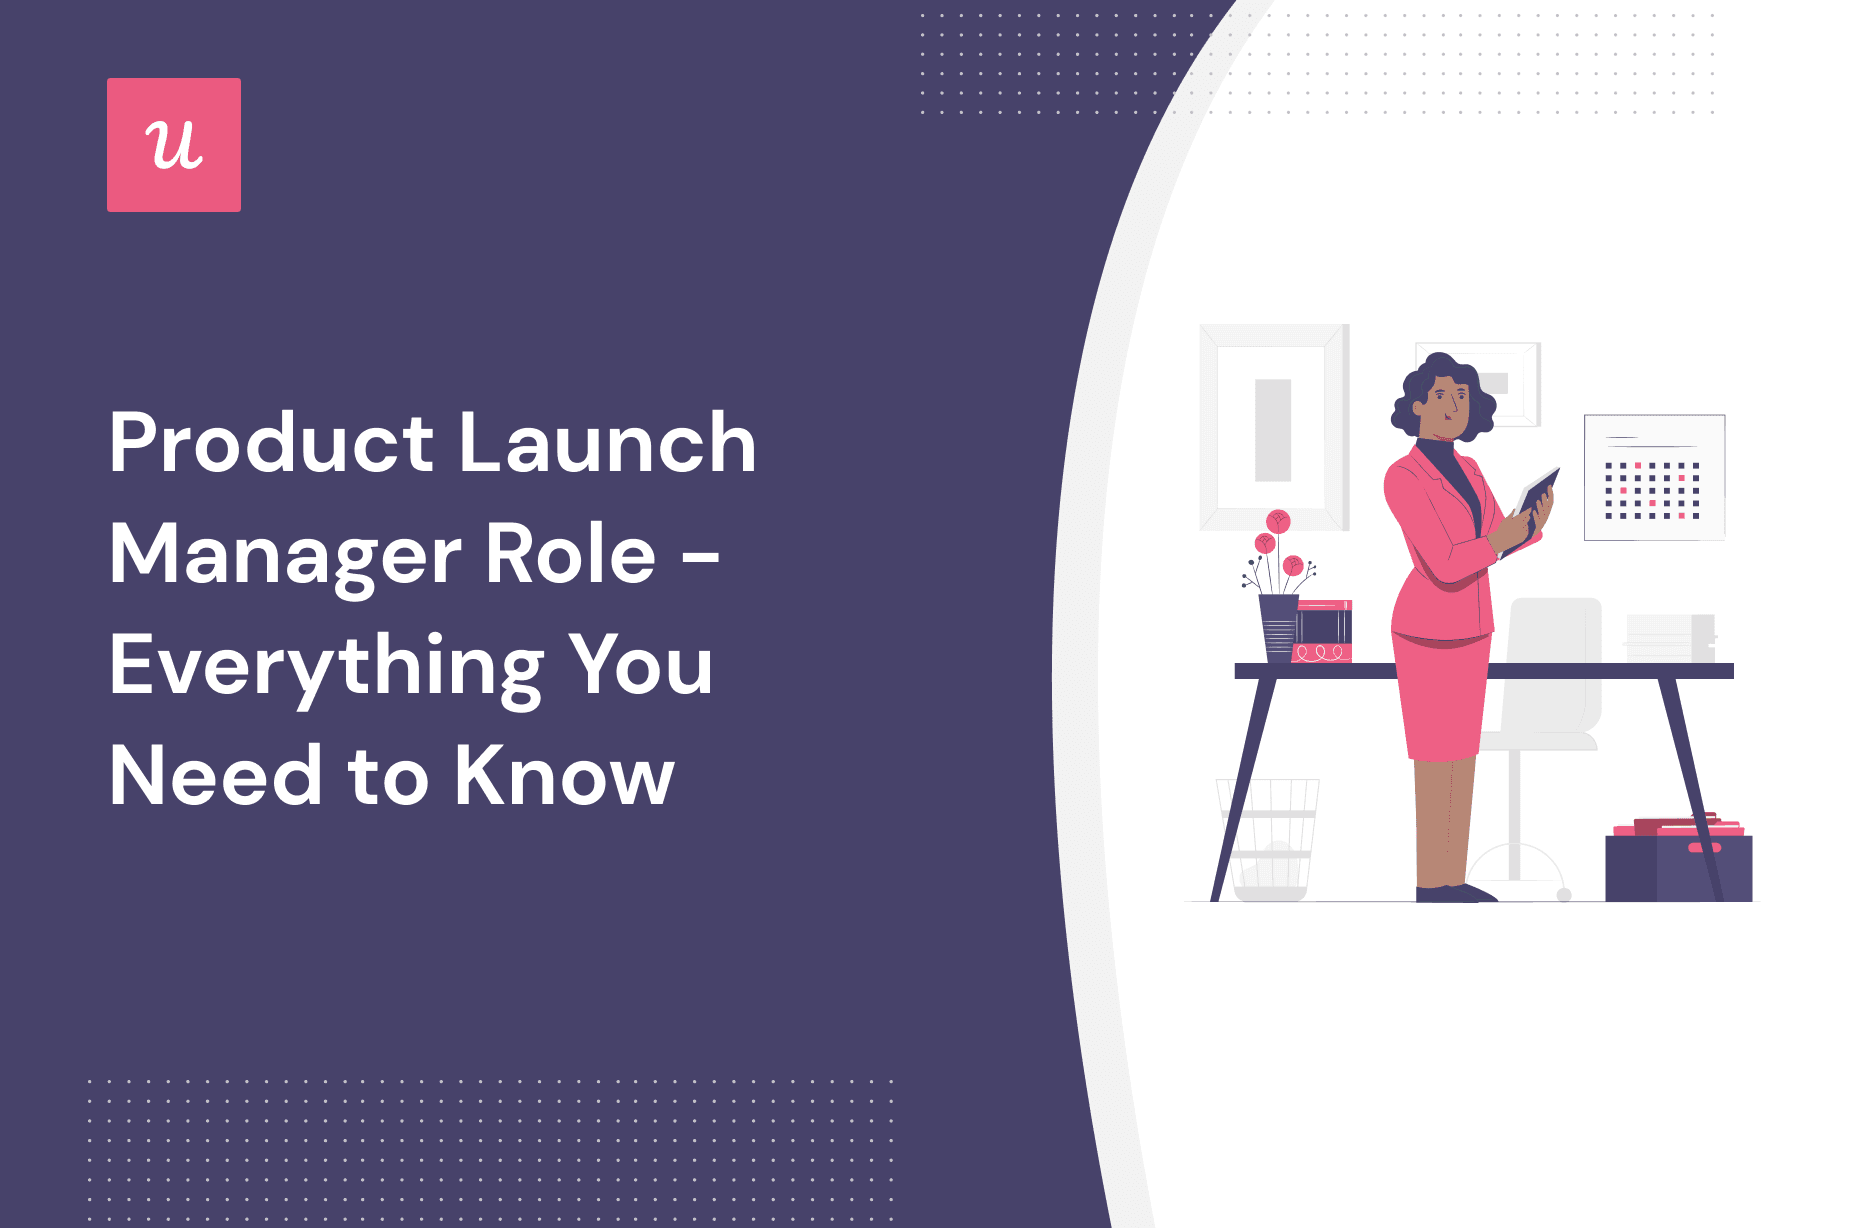 Product Launch Manager Role - Everything You Need to Know cover